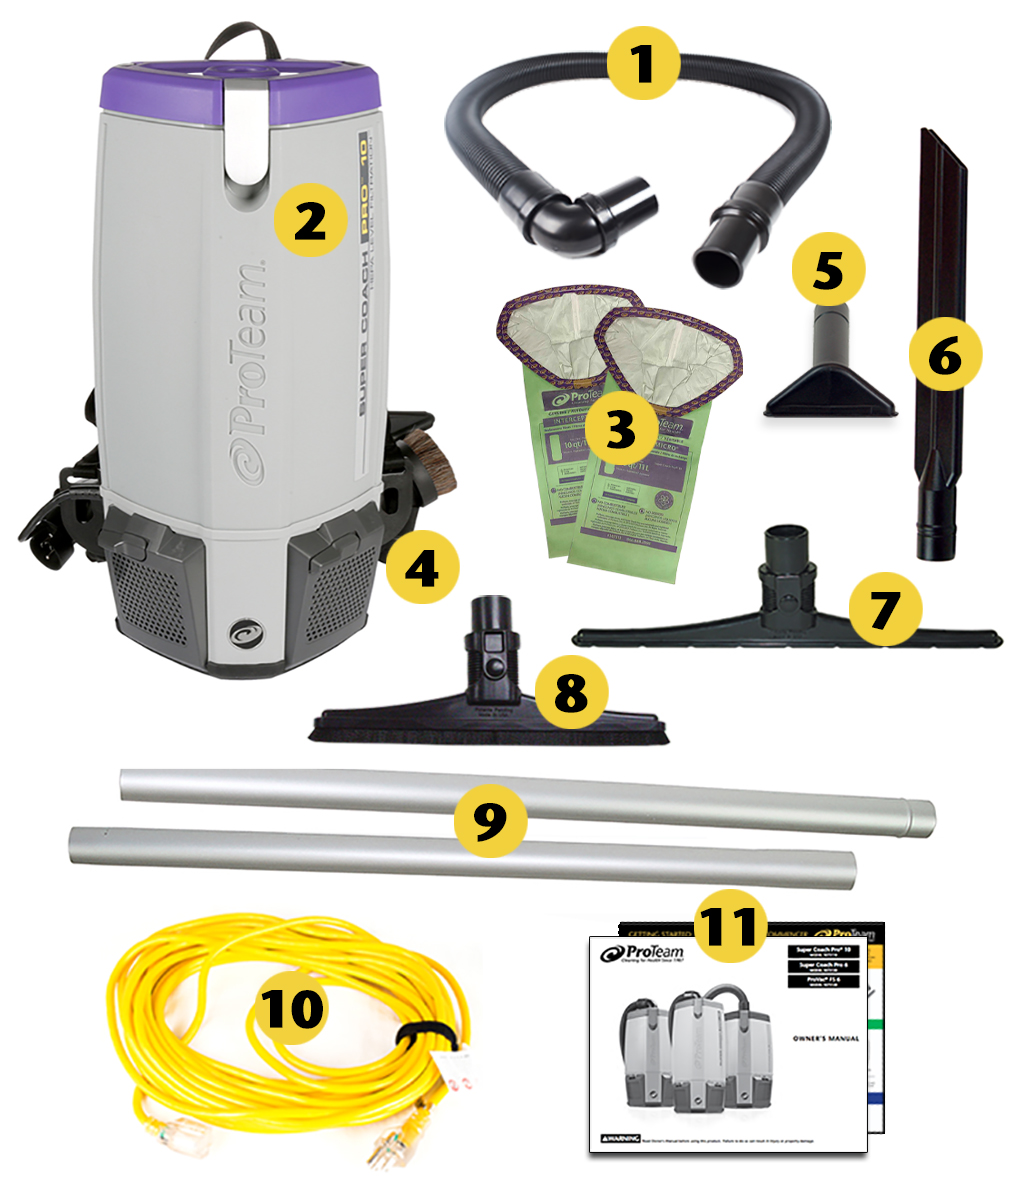 Image of what is included in the box of ProTeam Super Coach Pro 10, 10 quart backpack vacuum